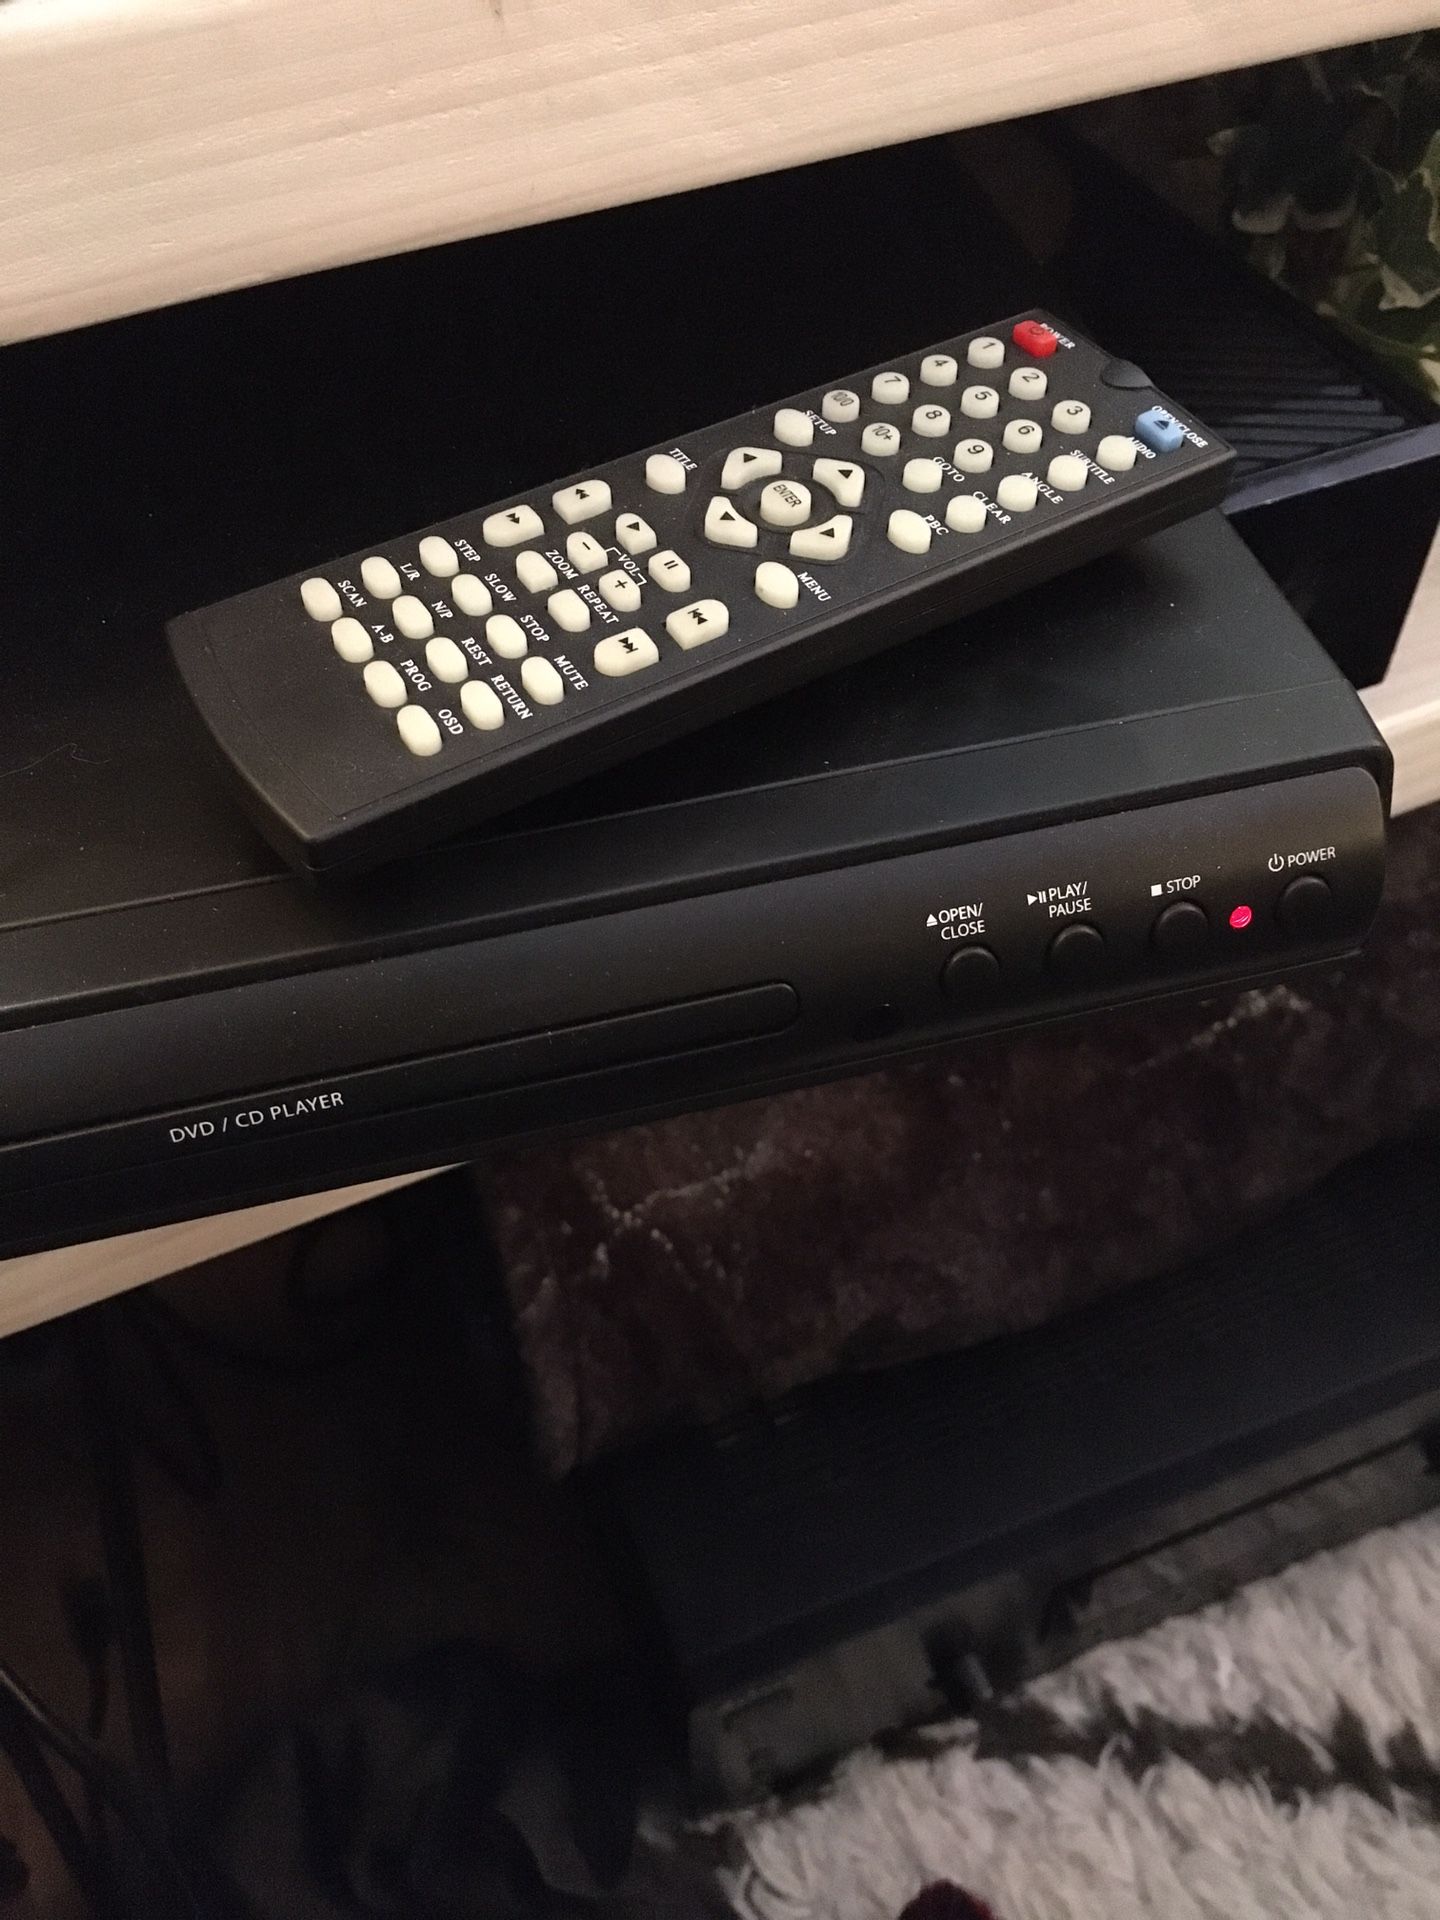 DVD player and remote